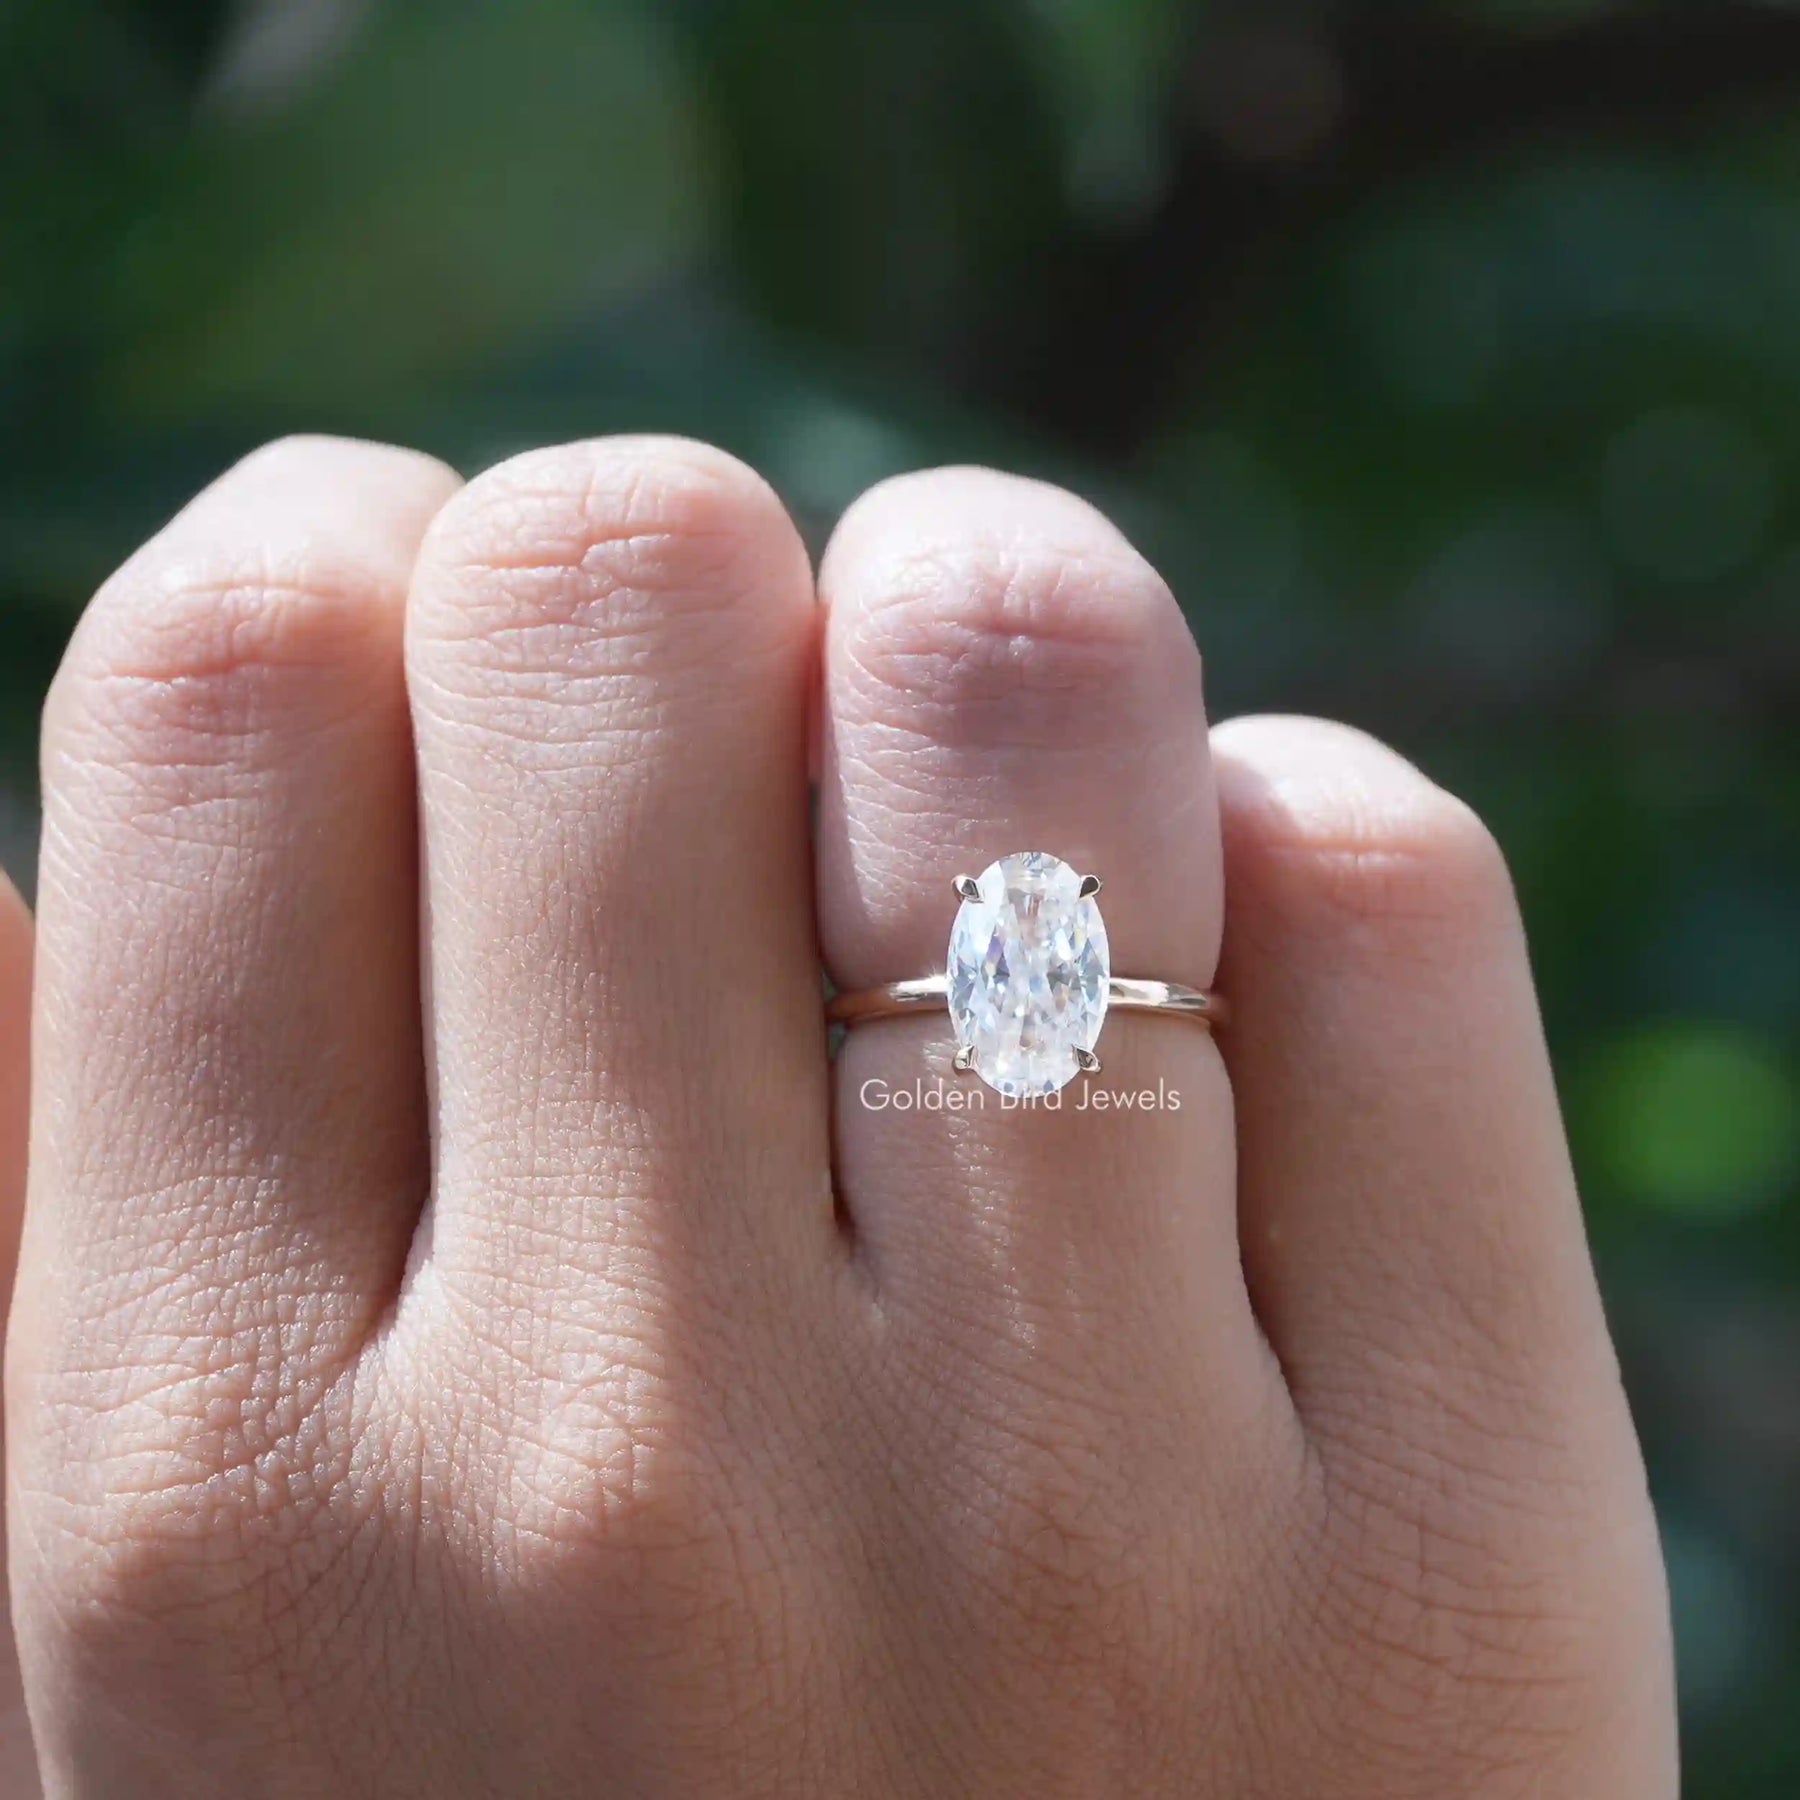 [Moissanite Crushed Ice Oval Cut Solitaire Ring]-[Golden Bird Jewels]